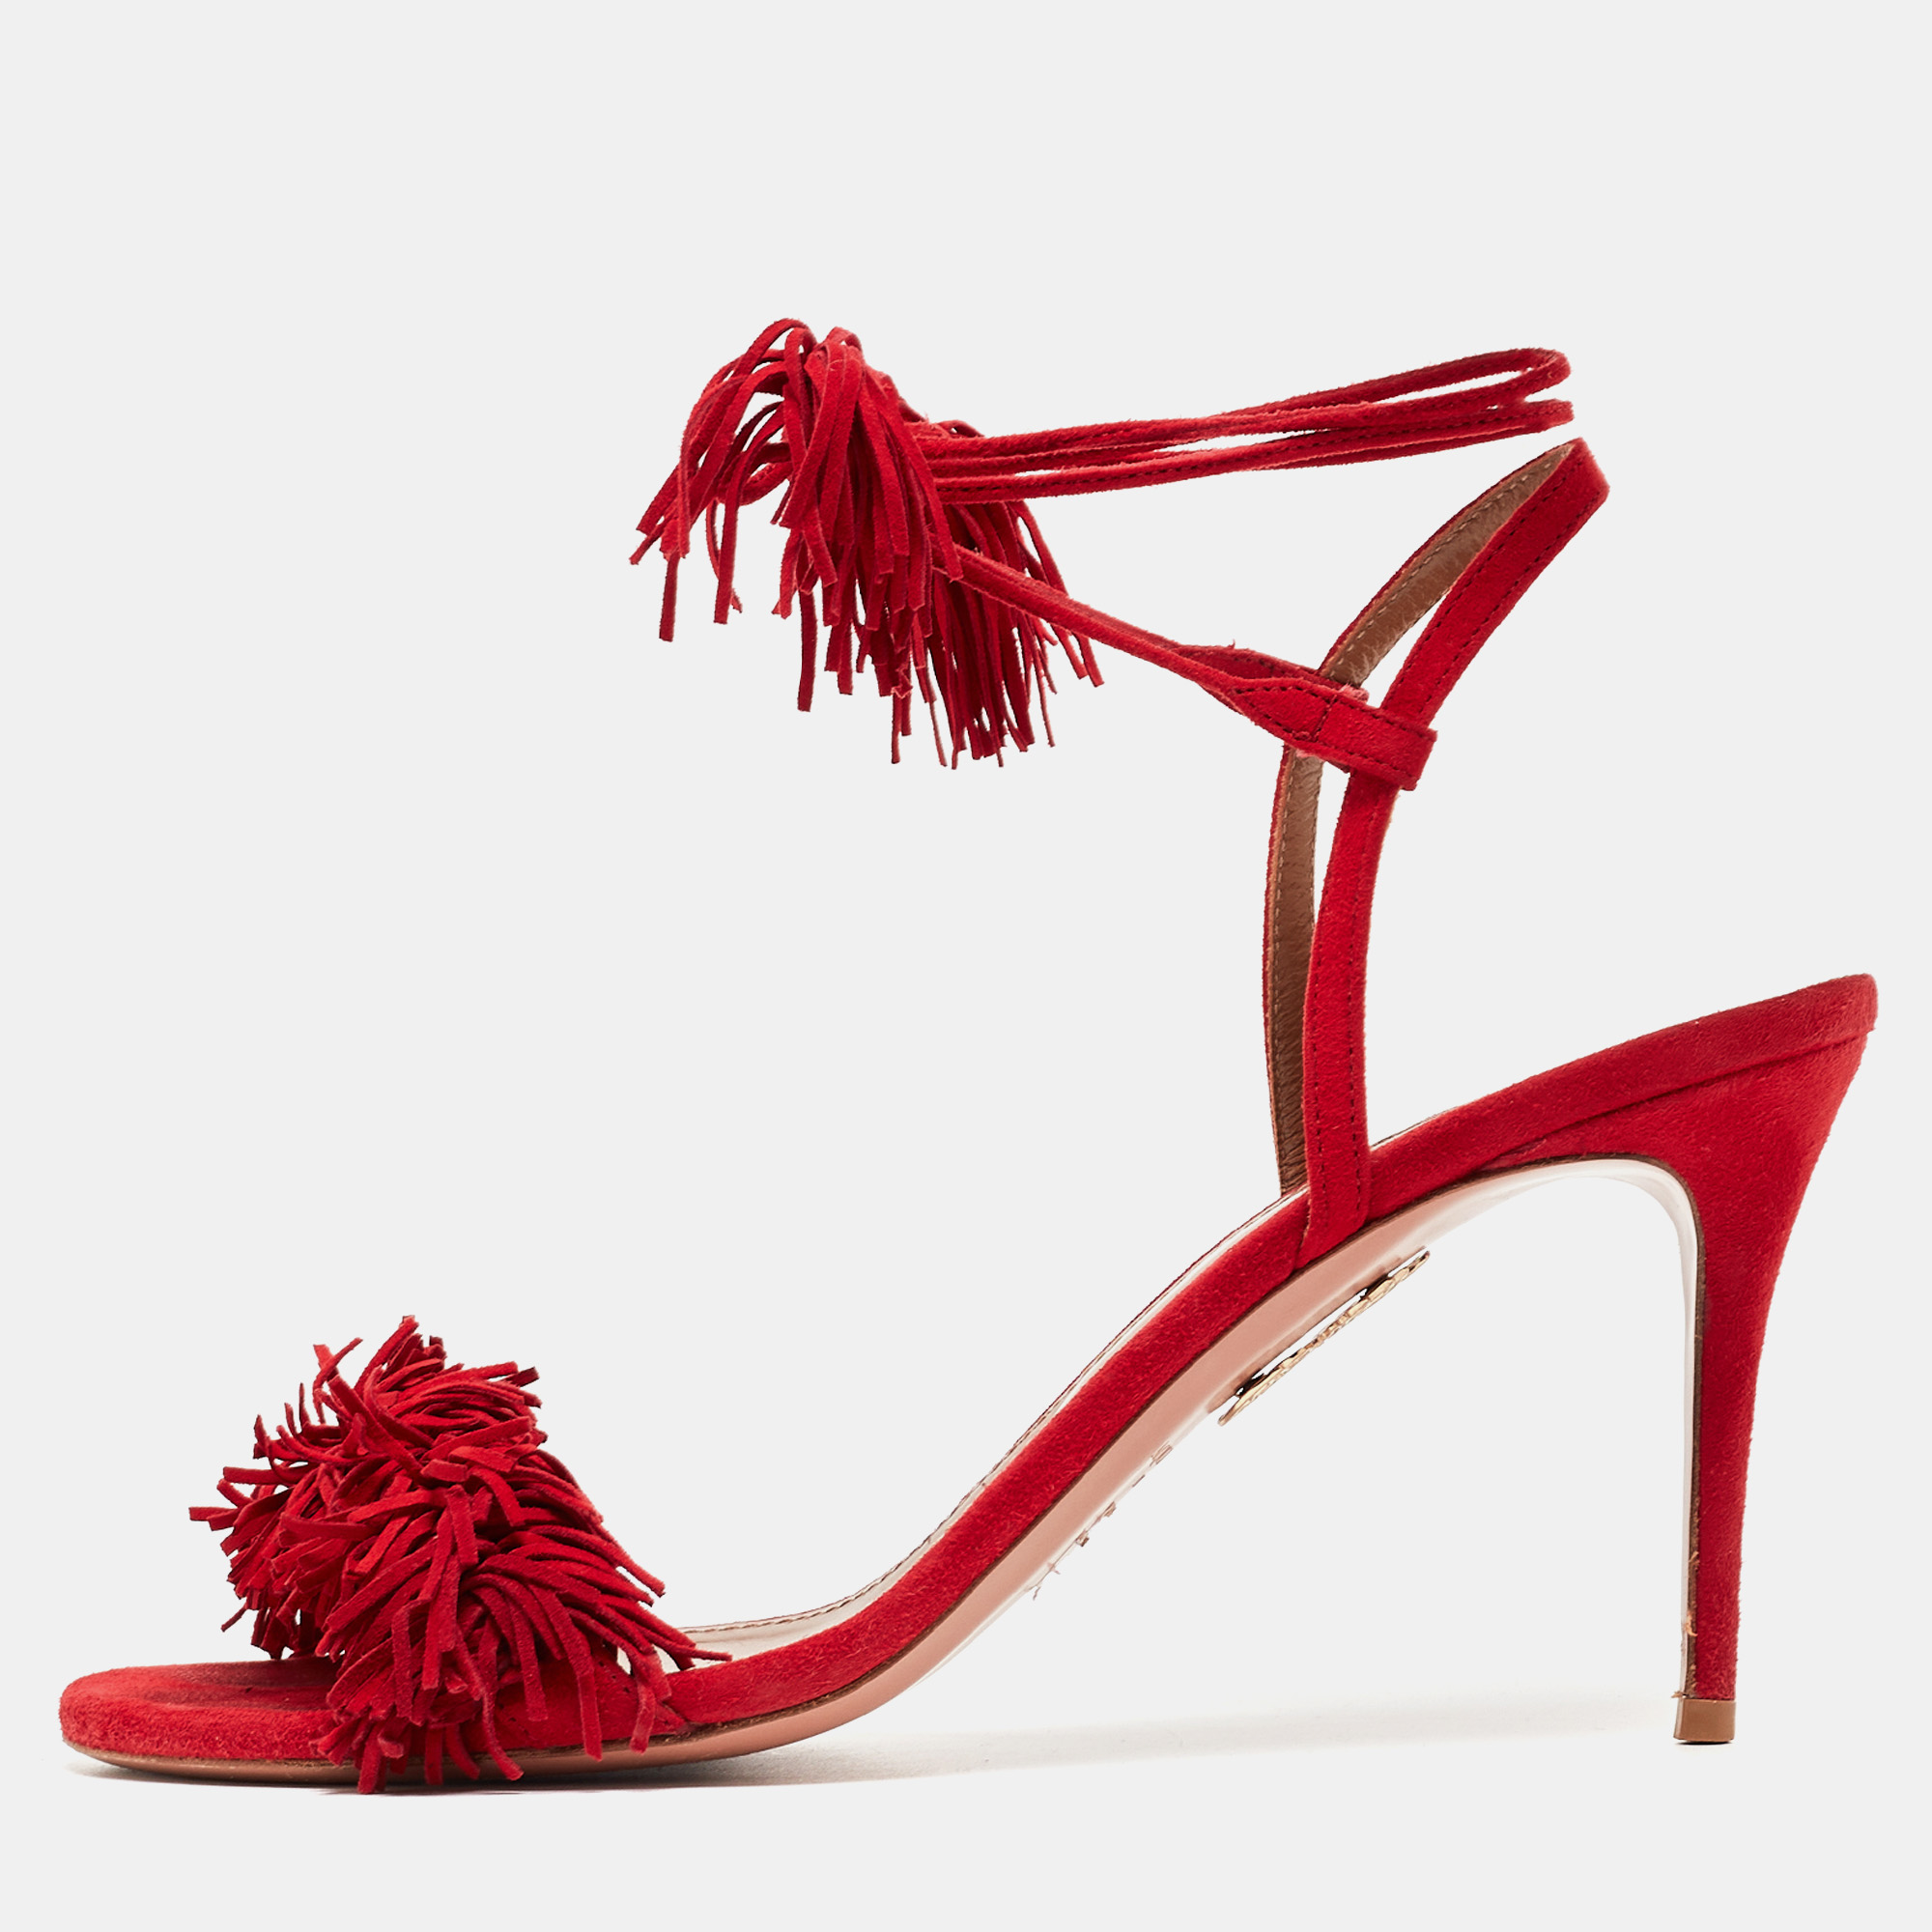 Aquazzura red fringed suede wild thing ankle wrap sandals size 39